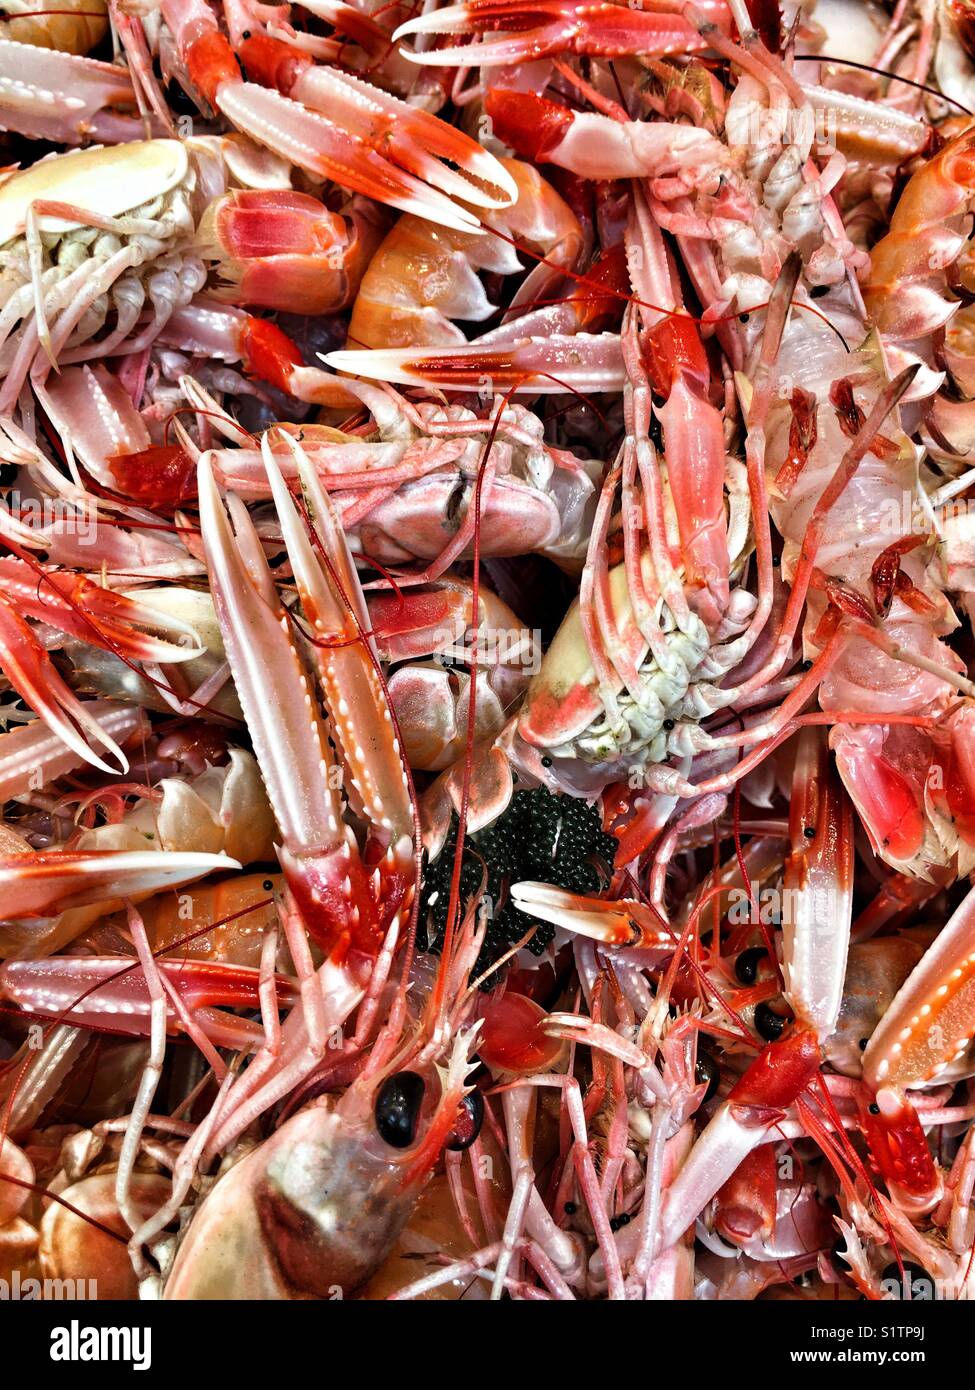 Crawfish and shrimps in the market Stock Photo